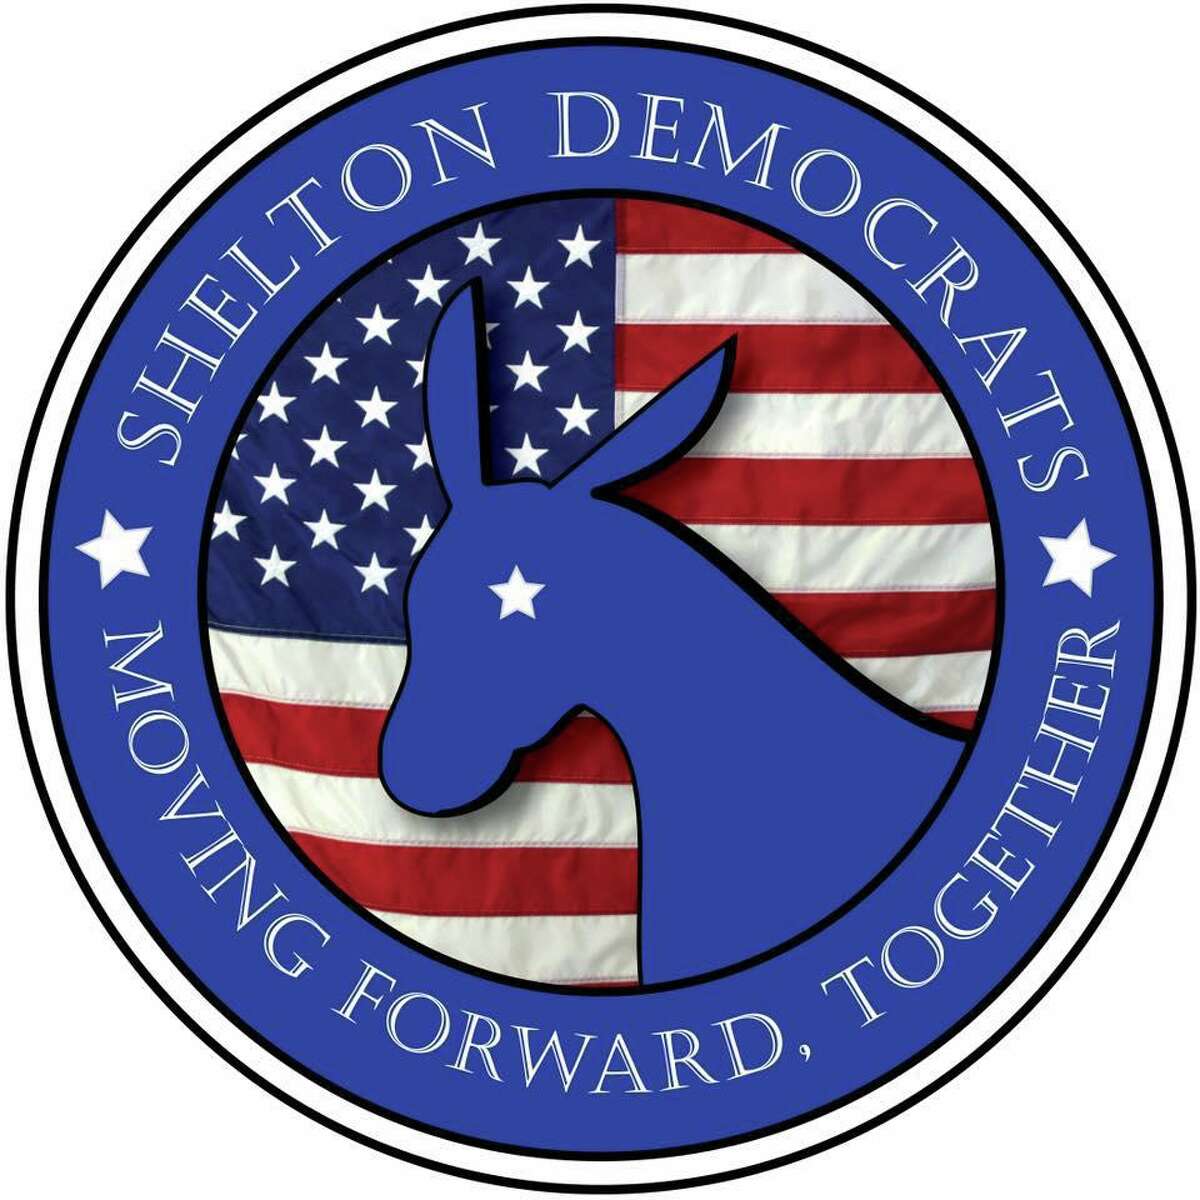 The Shelton Democratic Town Committee.